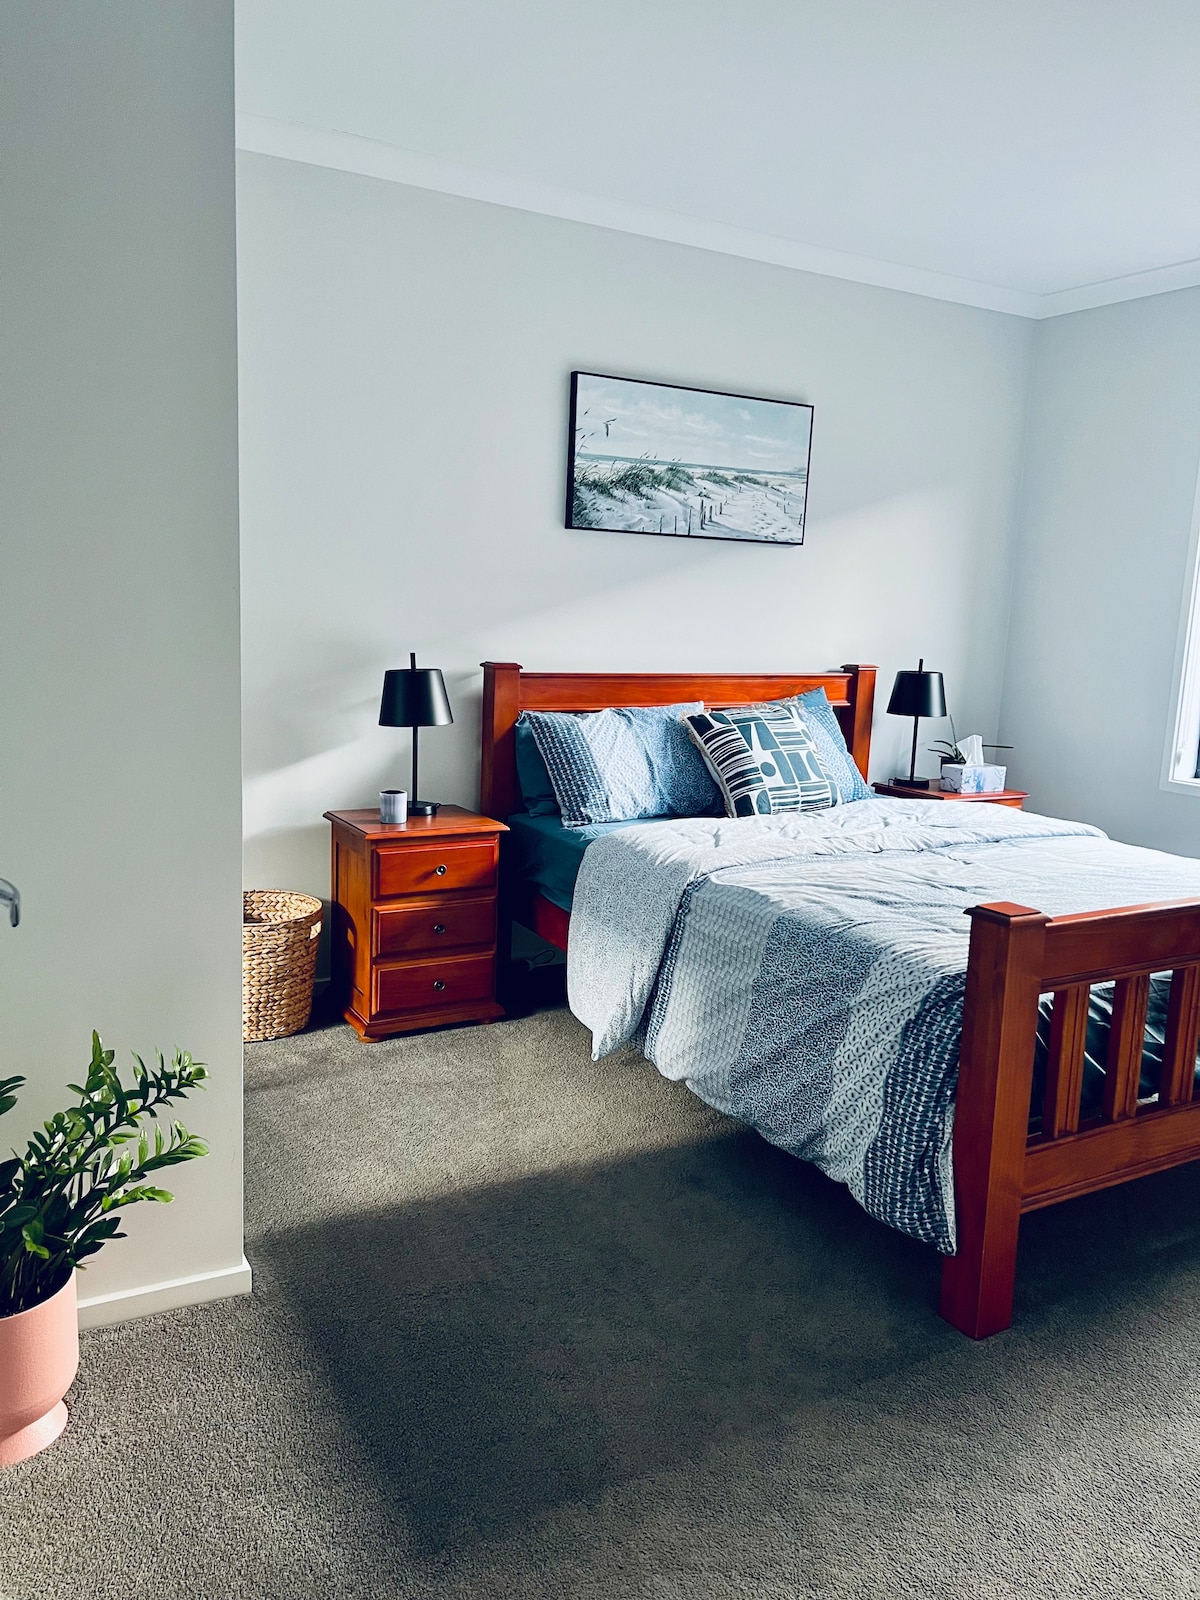 Cozy room near Melbourne airport